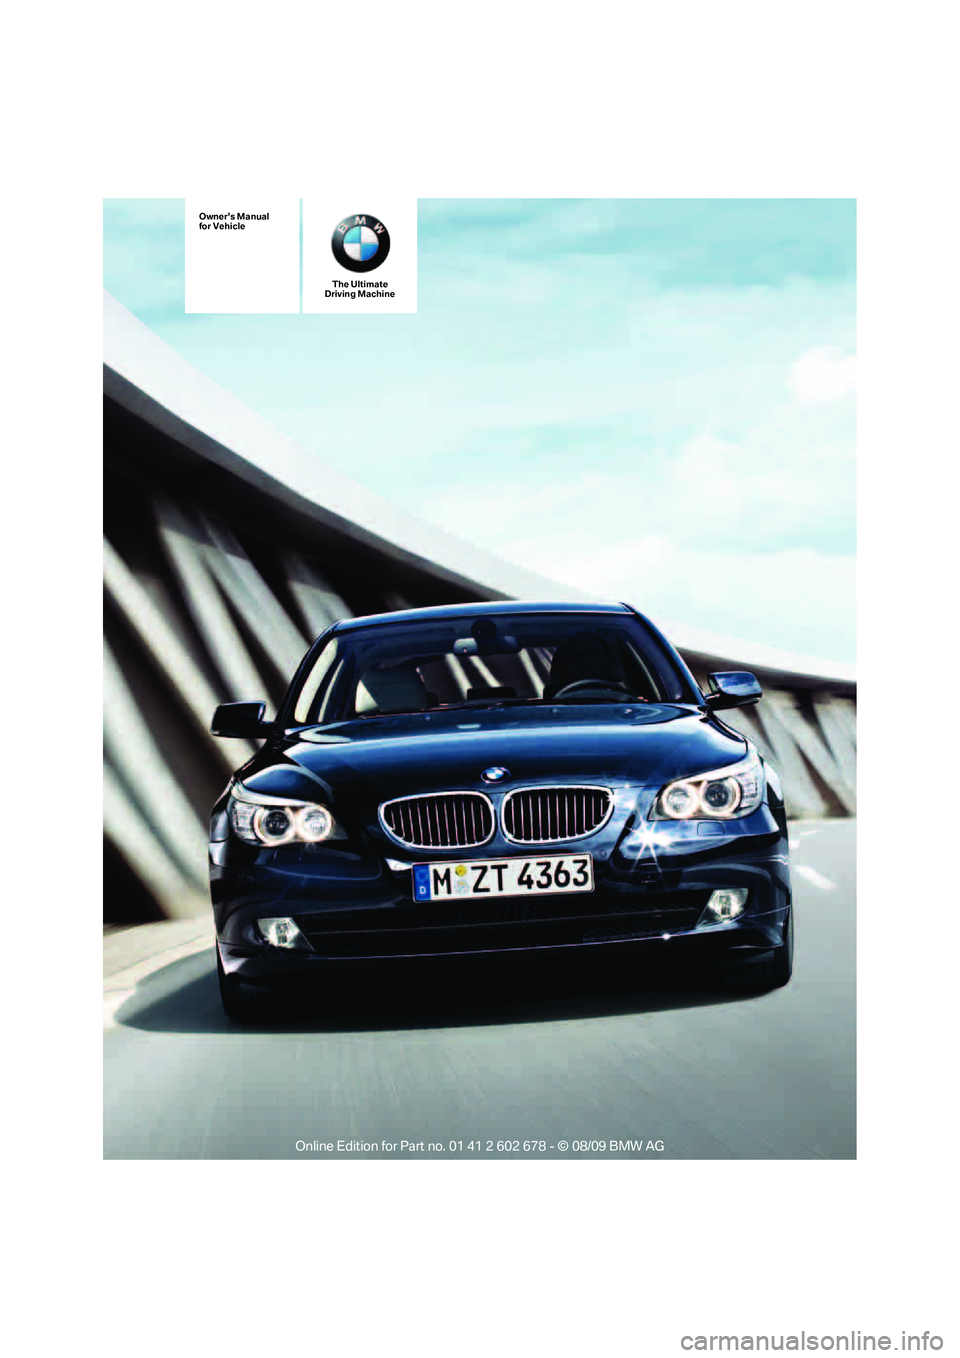 BMW 535I XDRIVE SPORTS WAGON 2010  Owners Manual The Ultimate
Driving Machine
Owners Manual
for Vehicle 